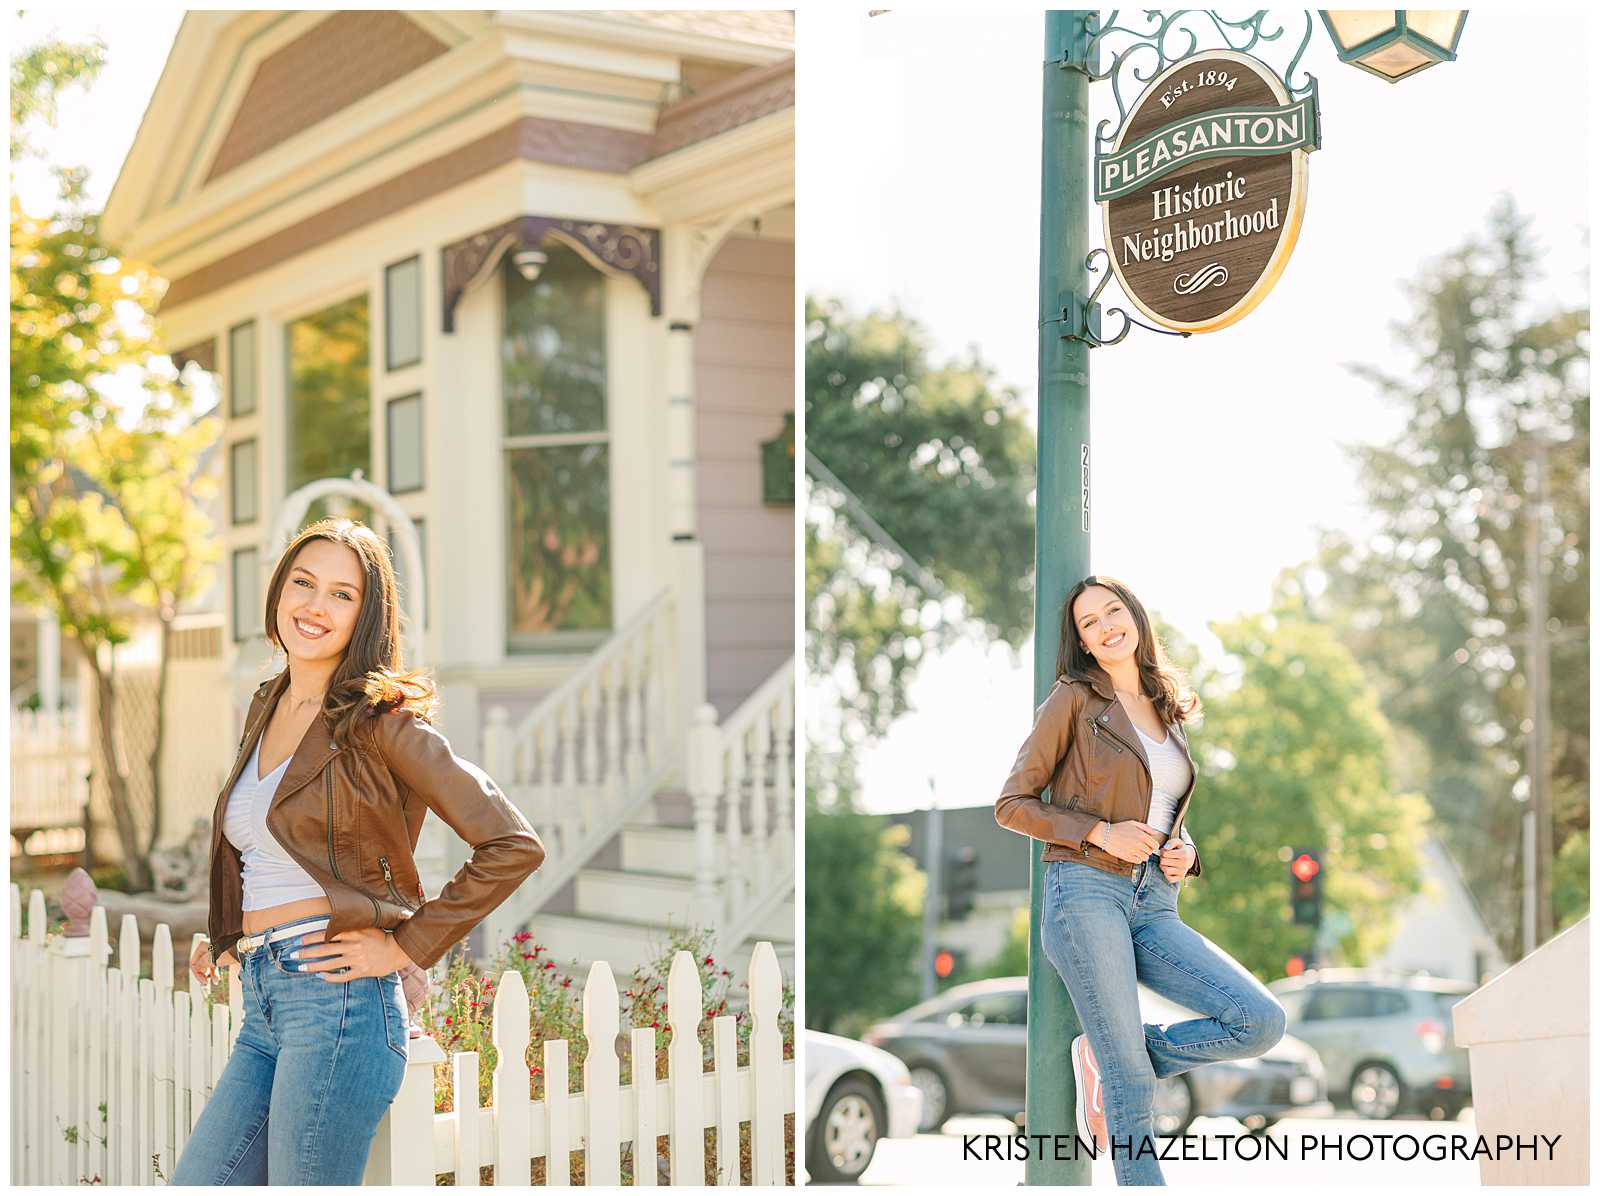 High school senior pics with Victorian houses in downtown Pleasanton Calfornia